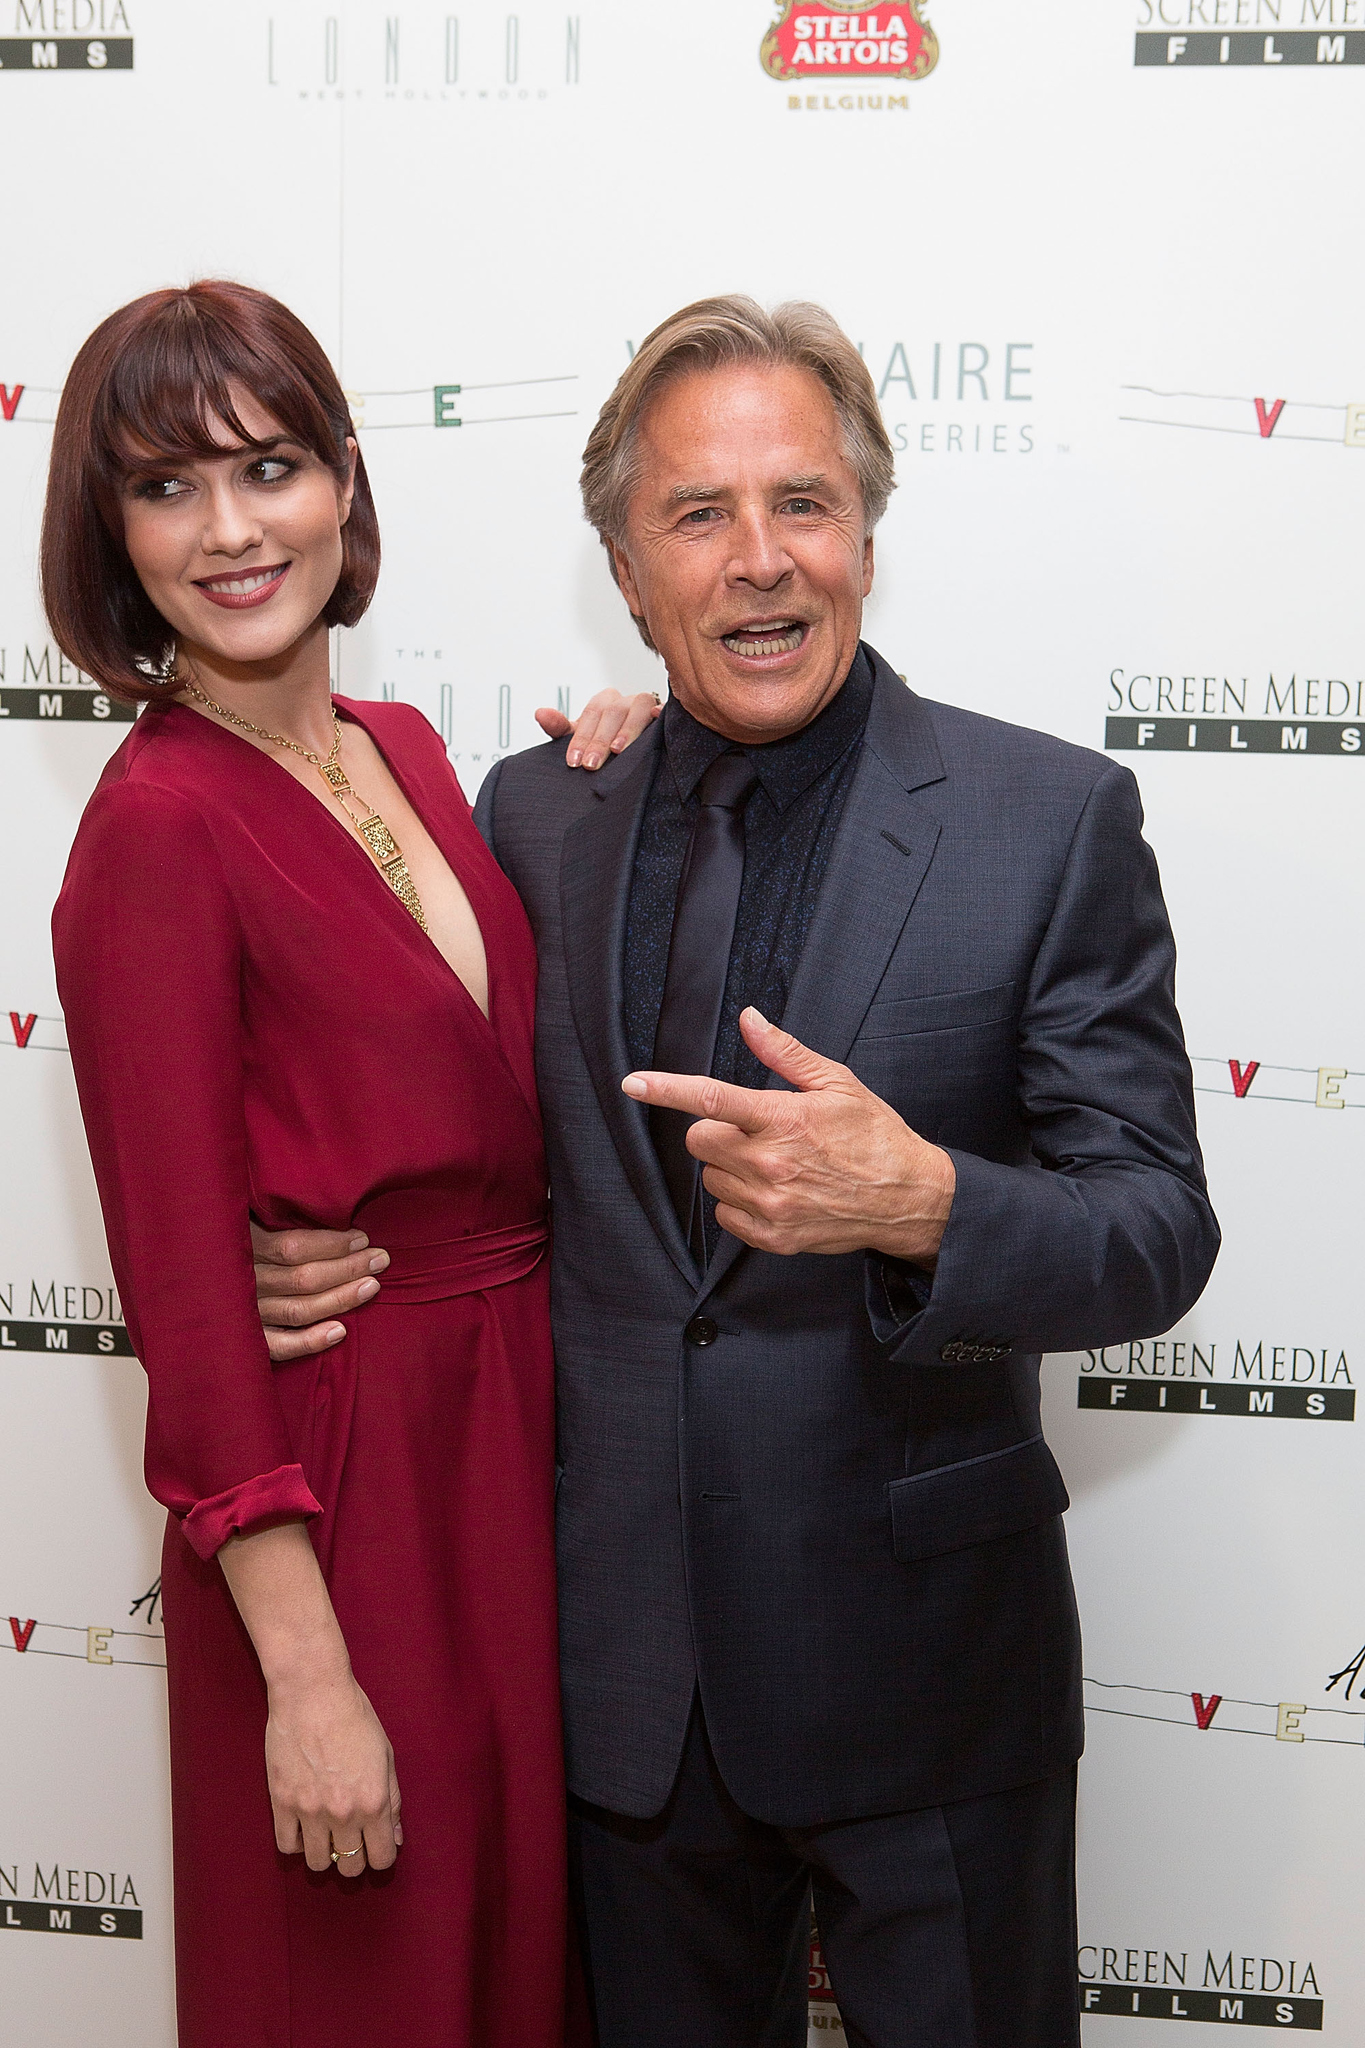 Don Johnson and Mary Elizabeth Winstead at event of Alex of Venice (2014)